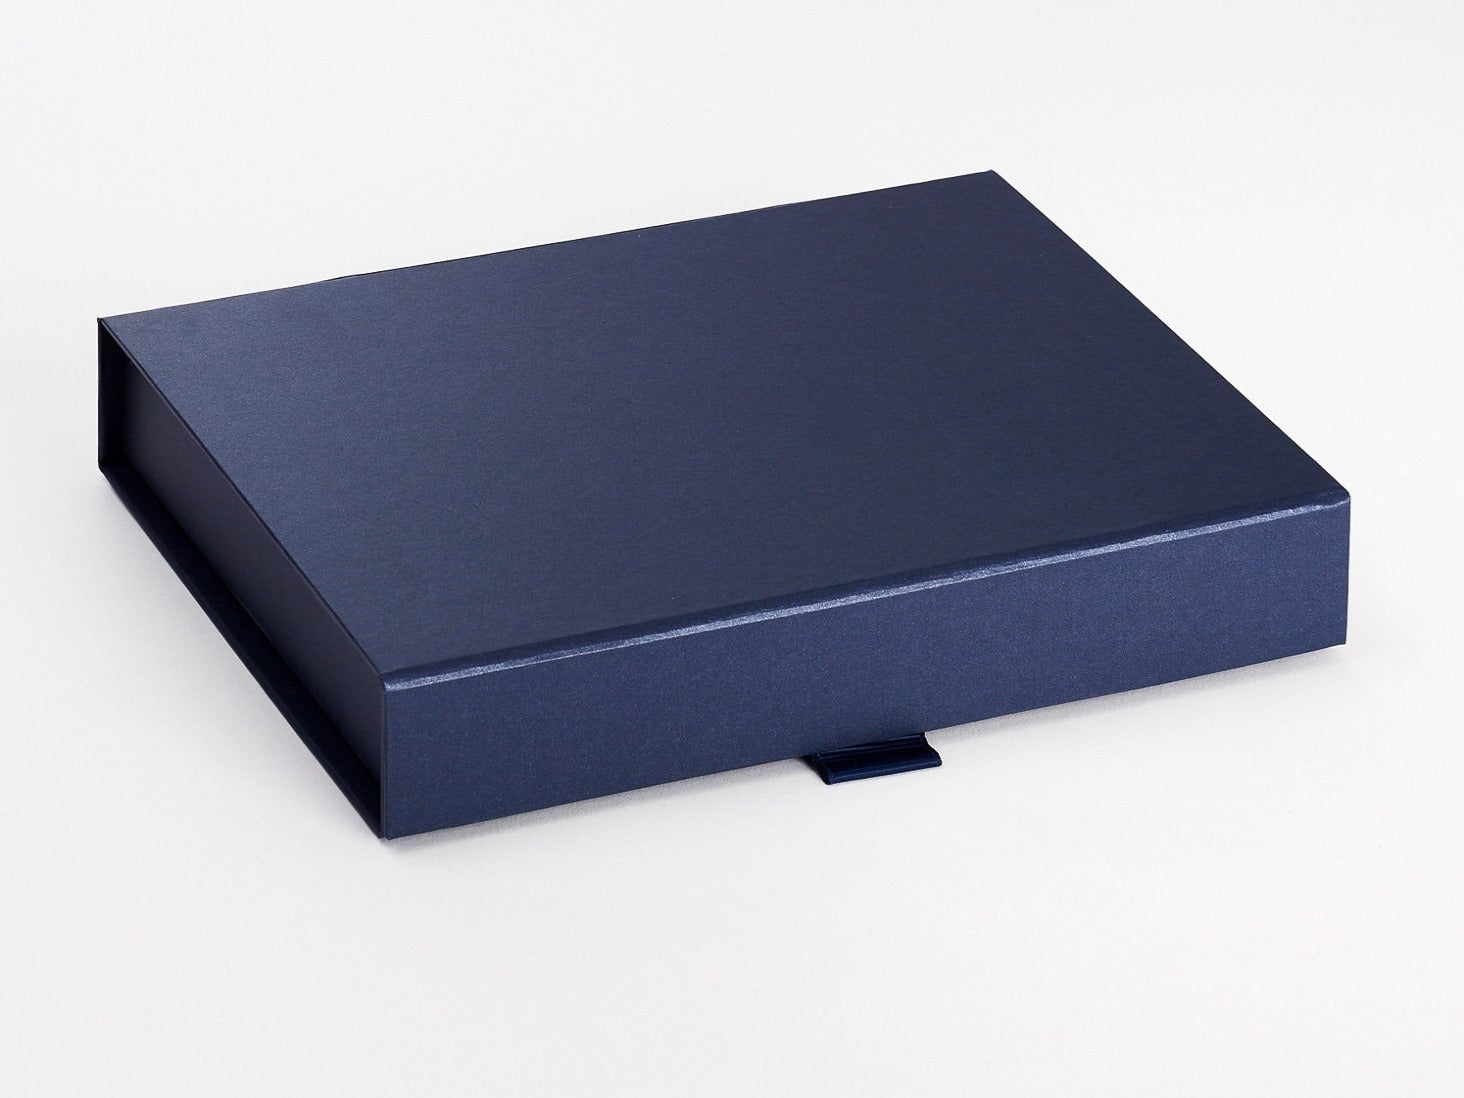 LOUIS VUITTON Gift BOX Magnetic 10.5"x 4.5"x 4" with  Envelope Card Blue Ribbon